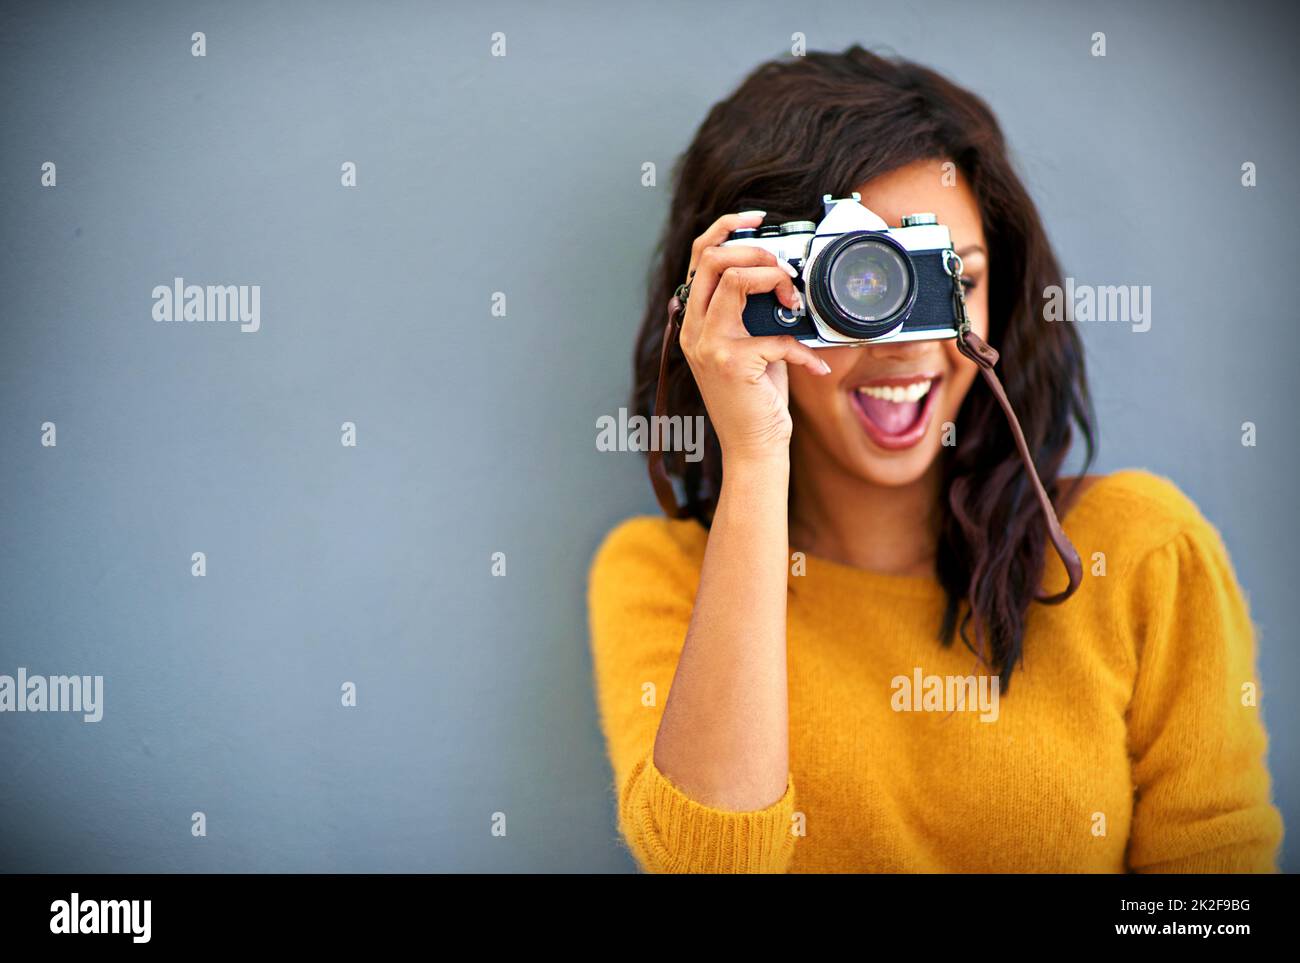 Happy snappy. Studio portrait of a young woman using a vintage camera against a gray background. Stock Photo